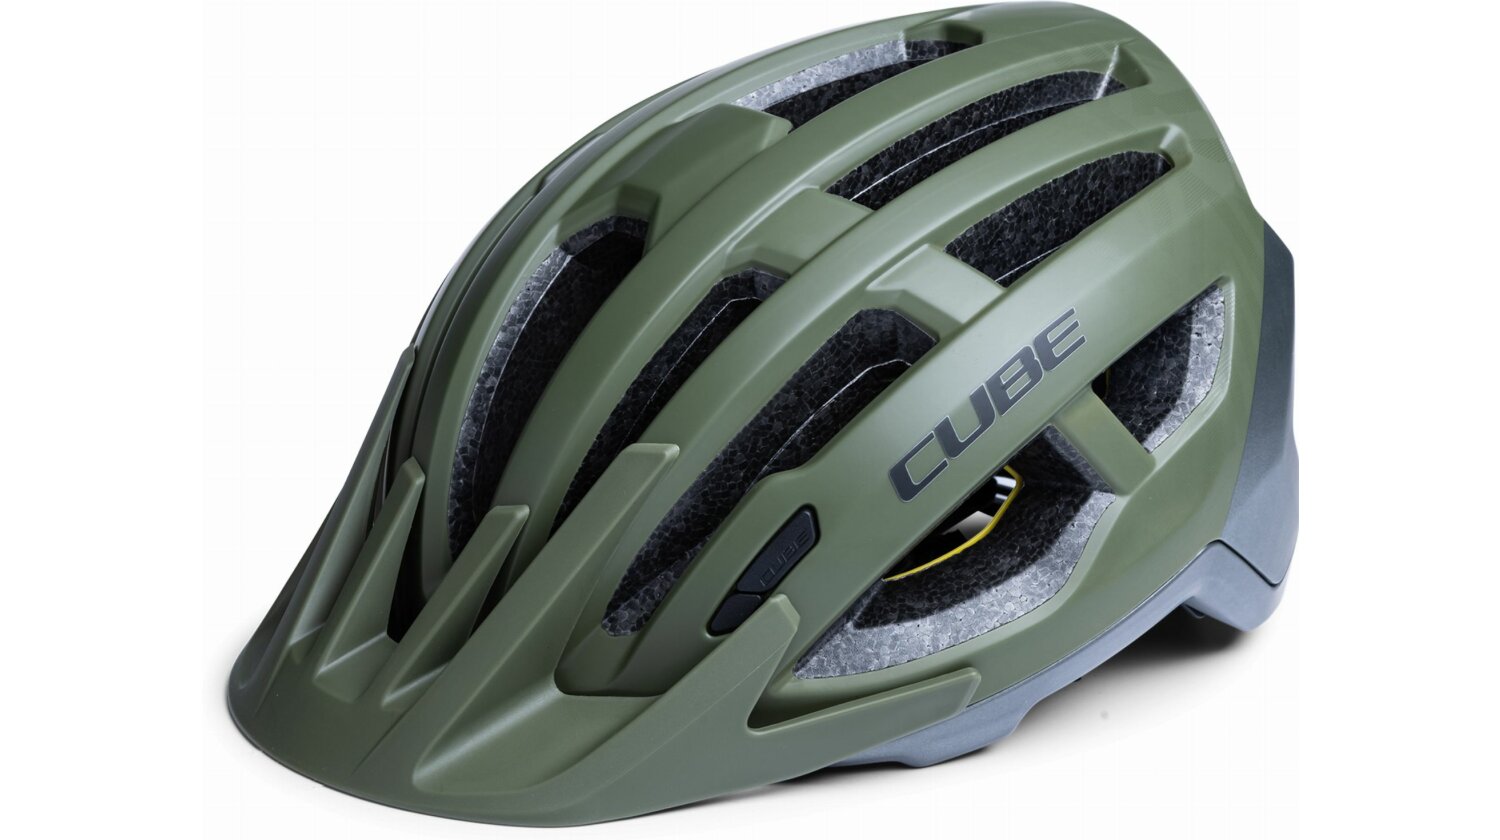 Cube Offpath Mips MTB-Helm green